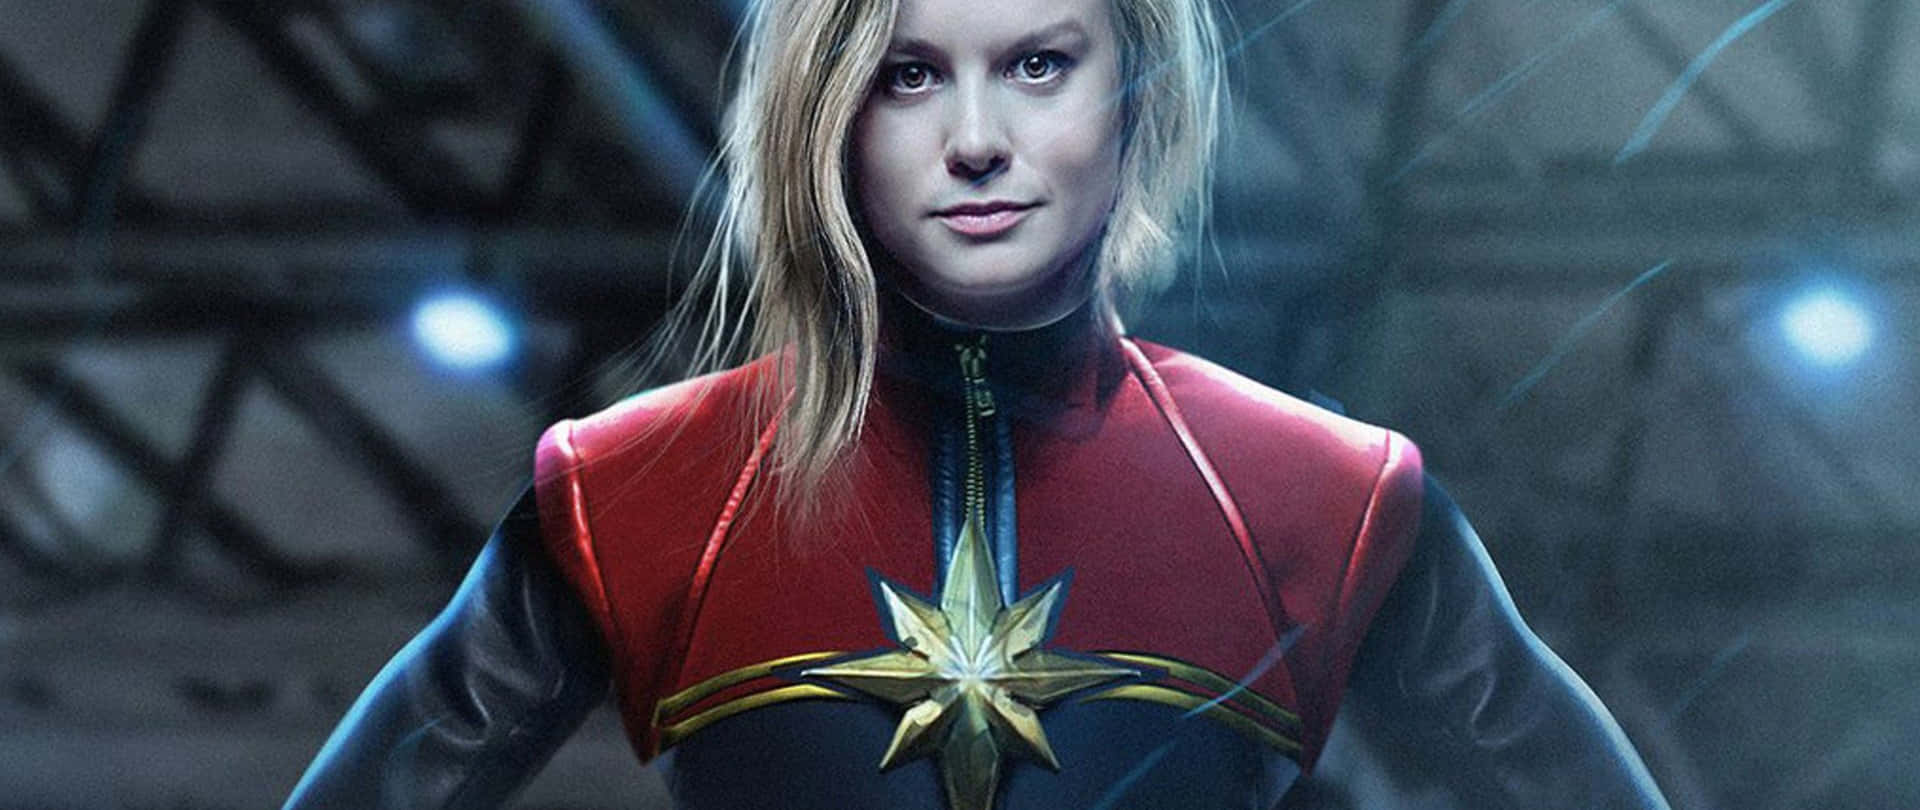 Captain Marvel blazing across the galaxy on her mission of justice Wallpaper